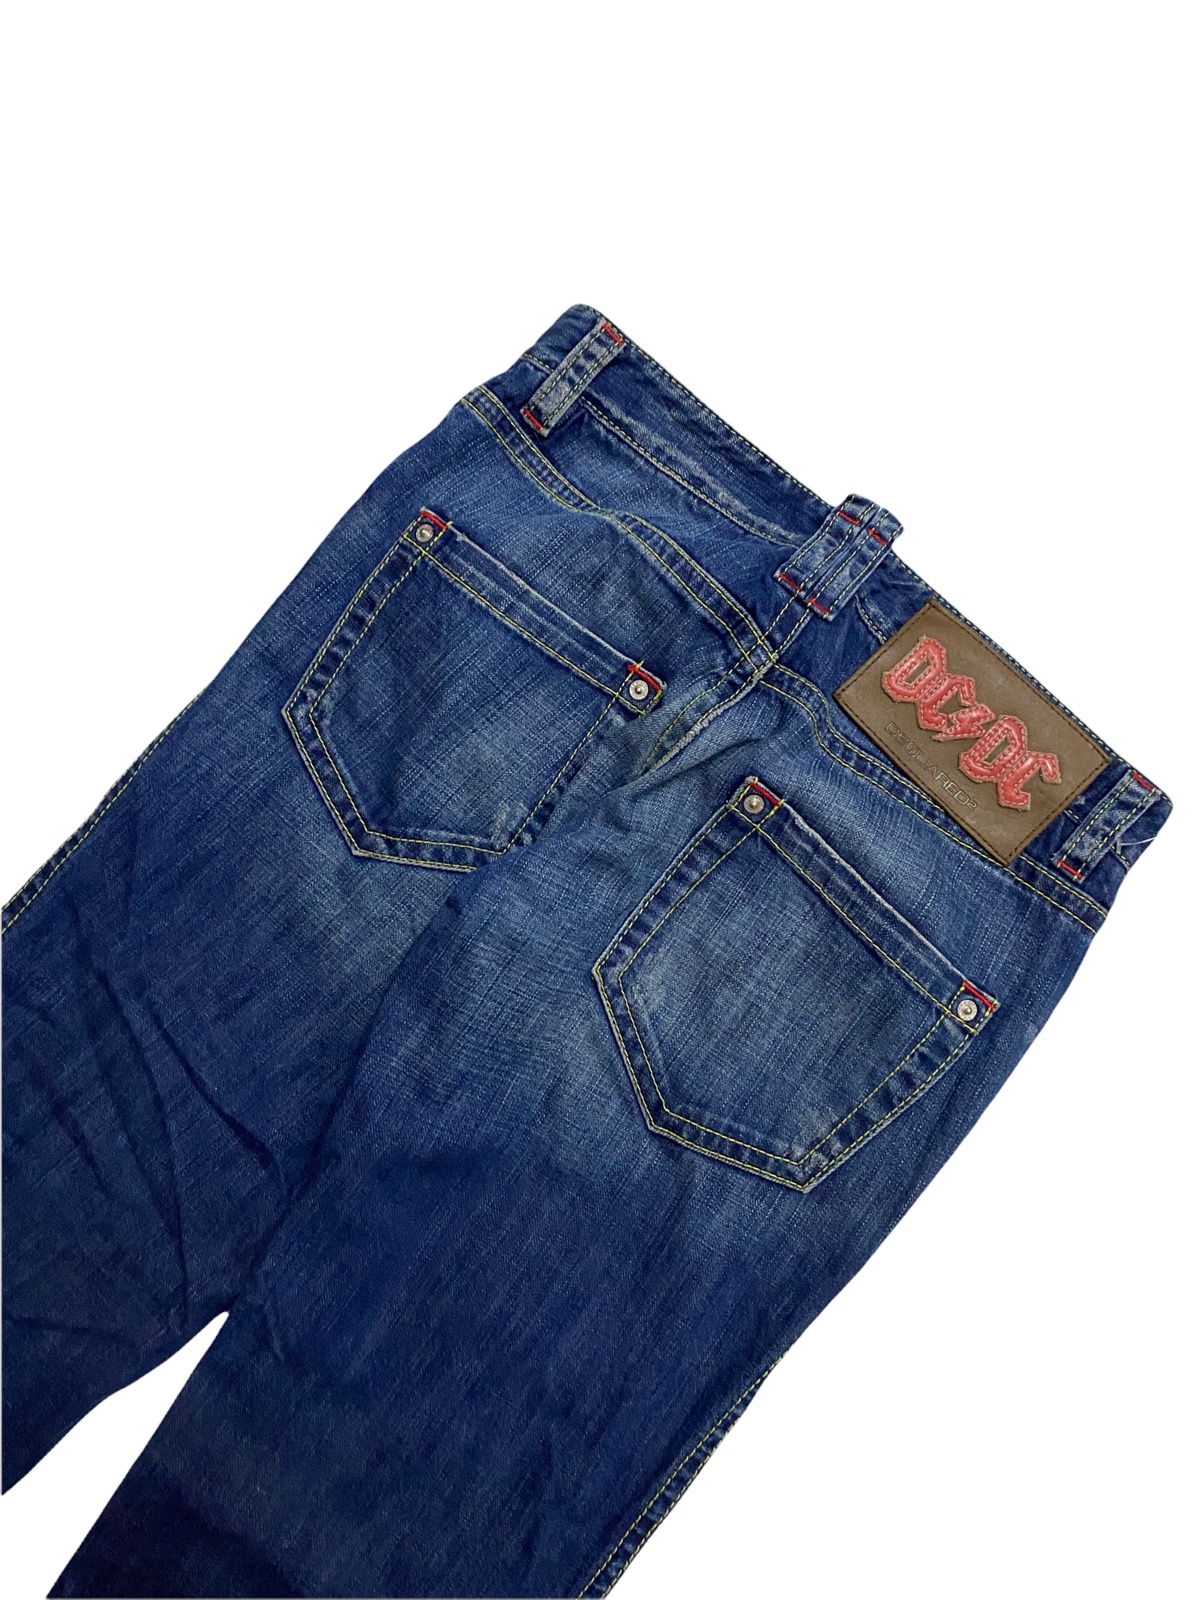 Dsquared2 ACDC Parody Fucker Made in Italy Jeans - 1